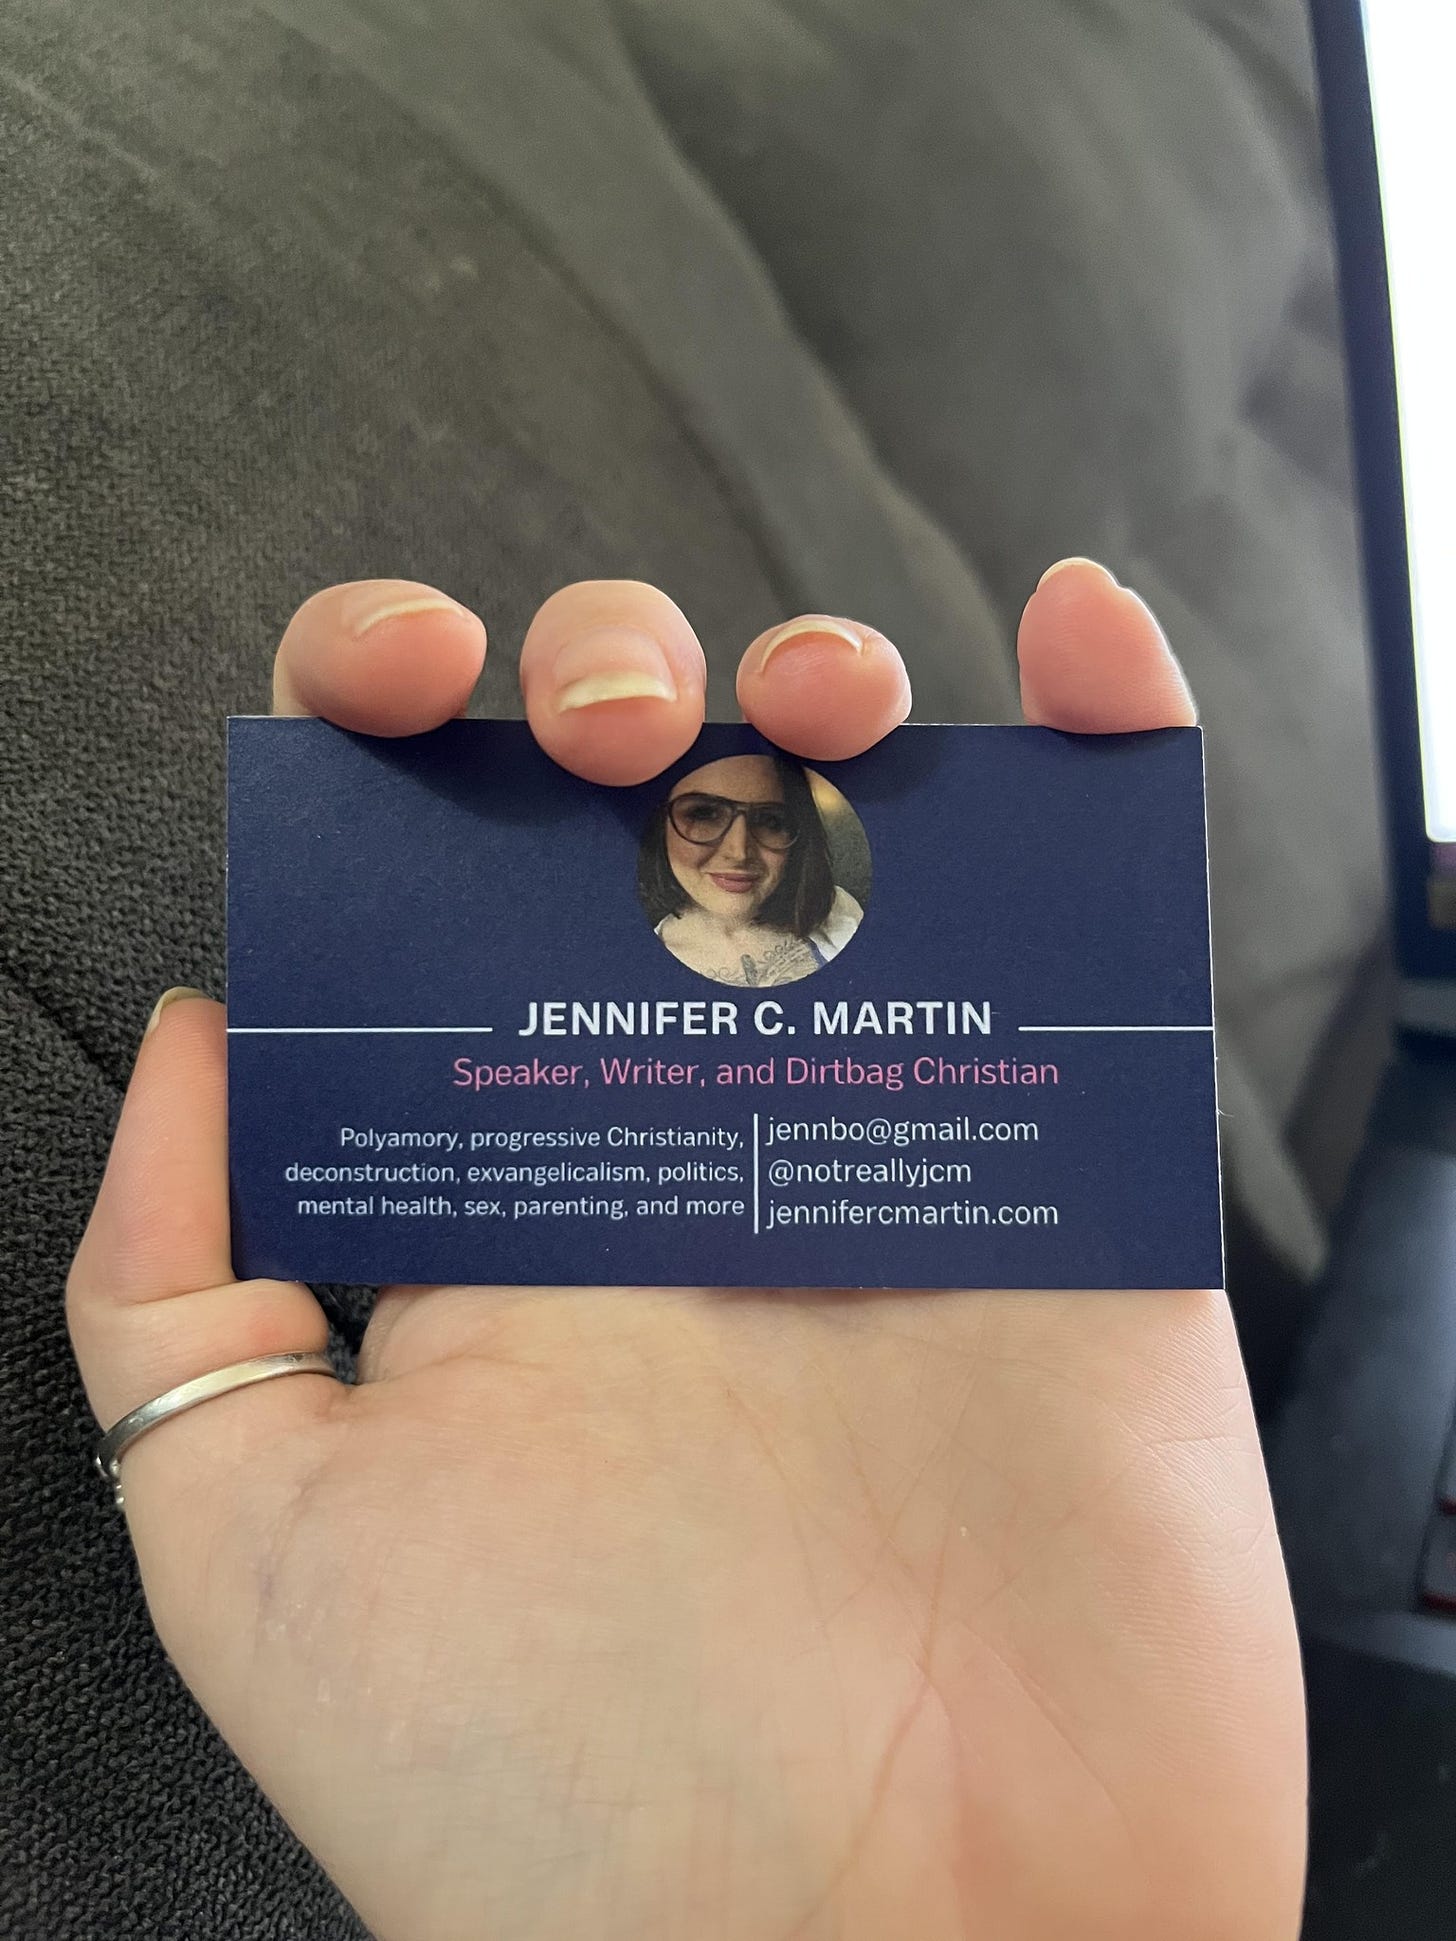 a business card (mine) in a woman's hand against a grey couch background. there's a photo of jennifer c. martin, with the word Jennifer C. Martin underneath, speaker, writer, and dirtbag christian, contact info and website info, and the words "polyamory, progressive Christianity, deconstruction, evangelicalism, politics, mental health, sex, parenting, and more"